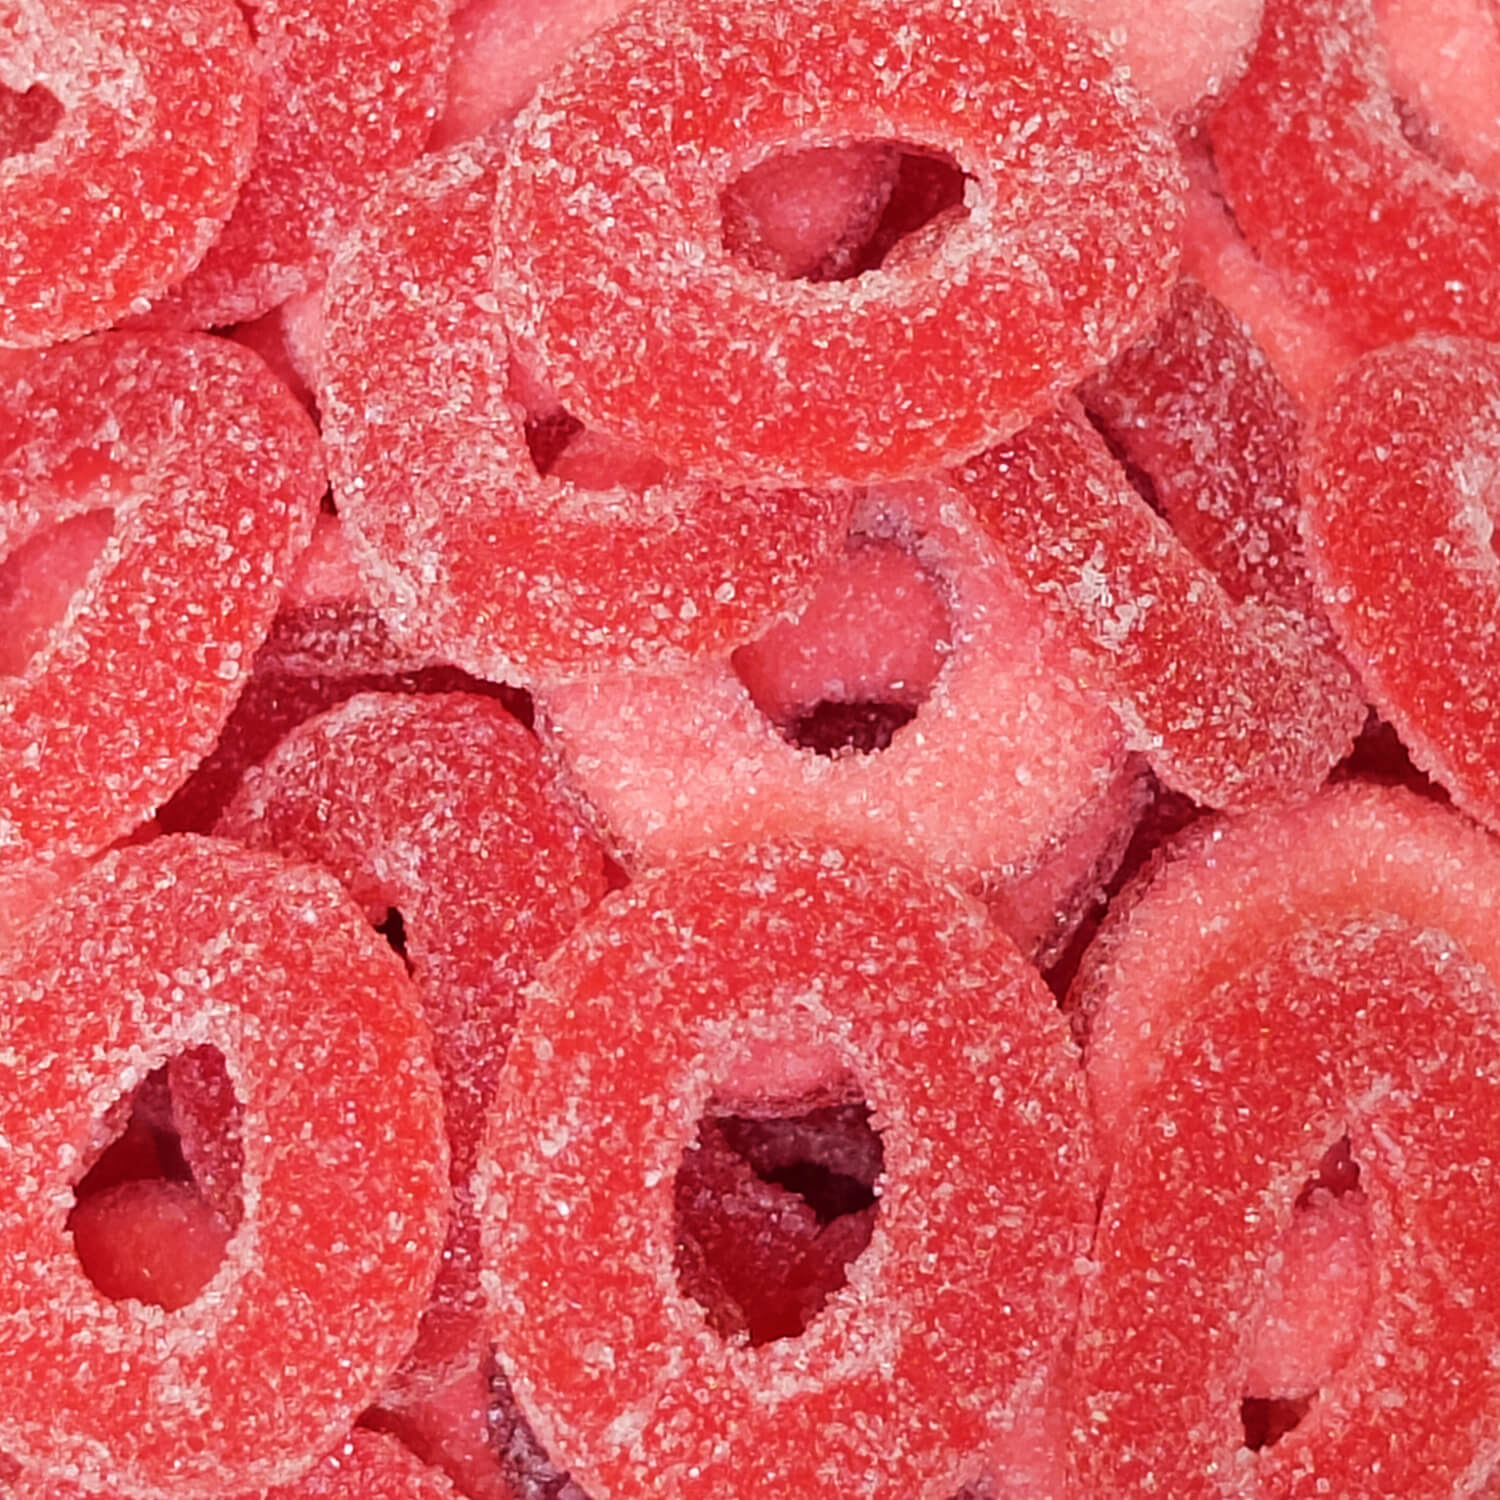 Sour strawberry rings